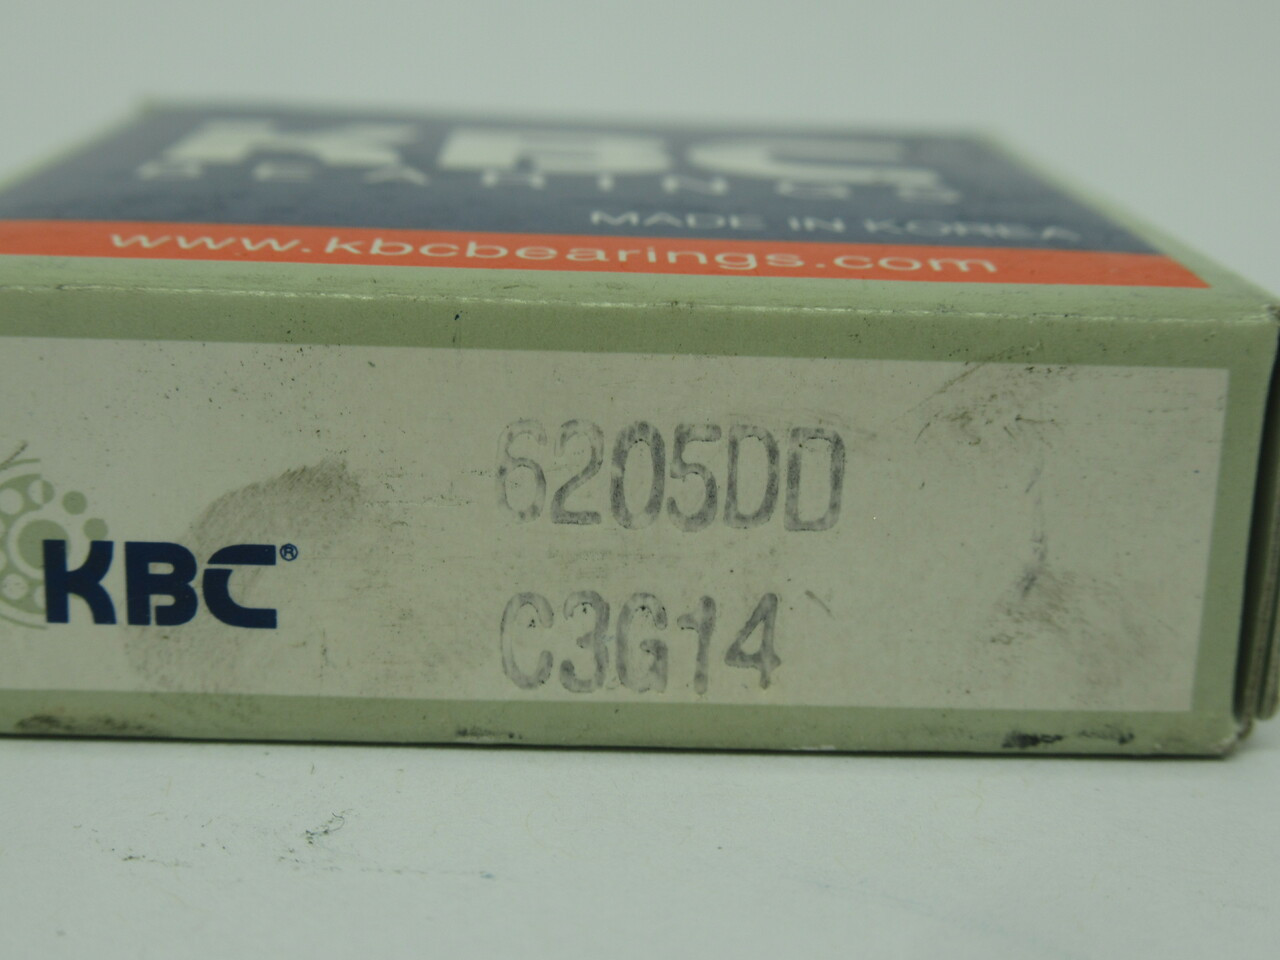 KBC 6205DD Deep Groove Double Sealed Bearing 25x52x15mm NEW